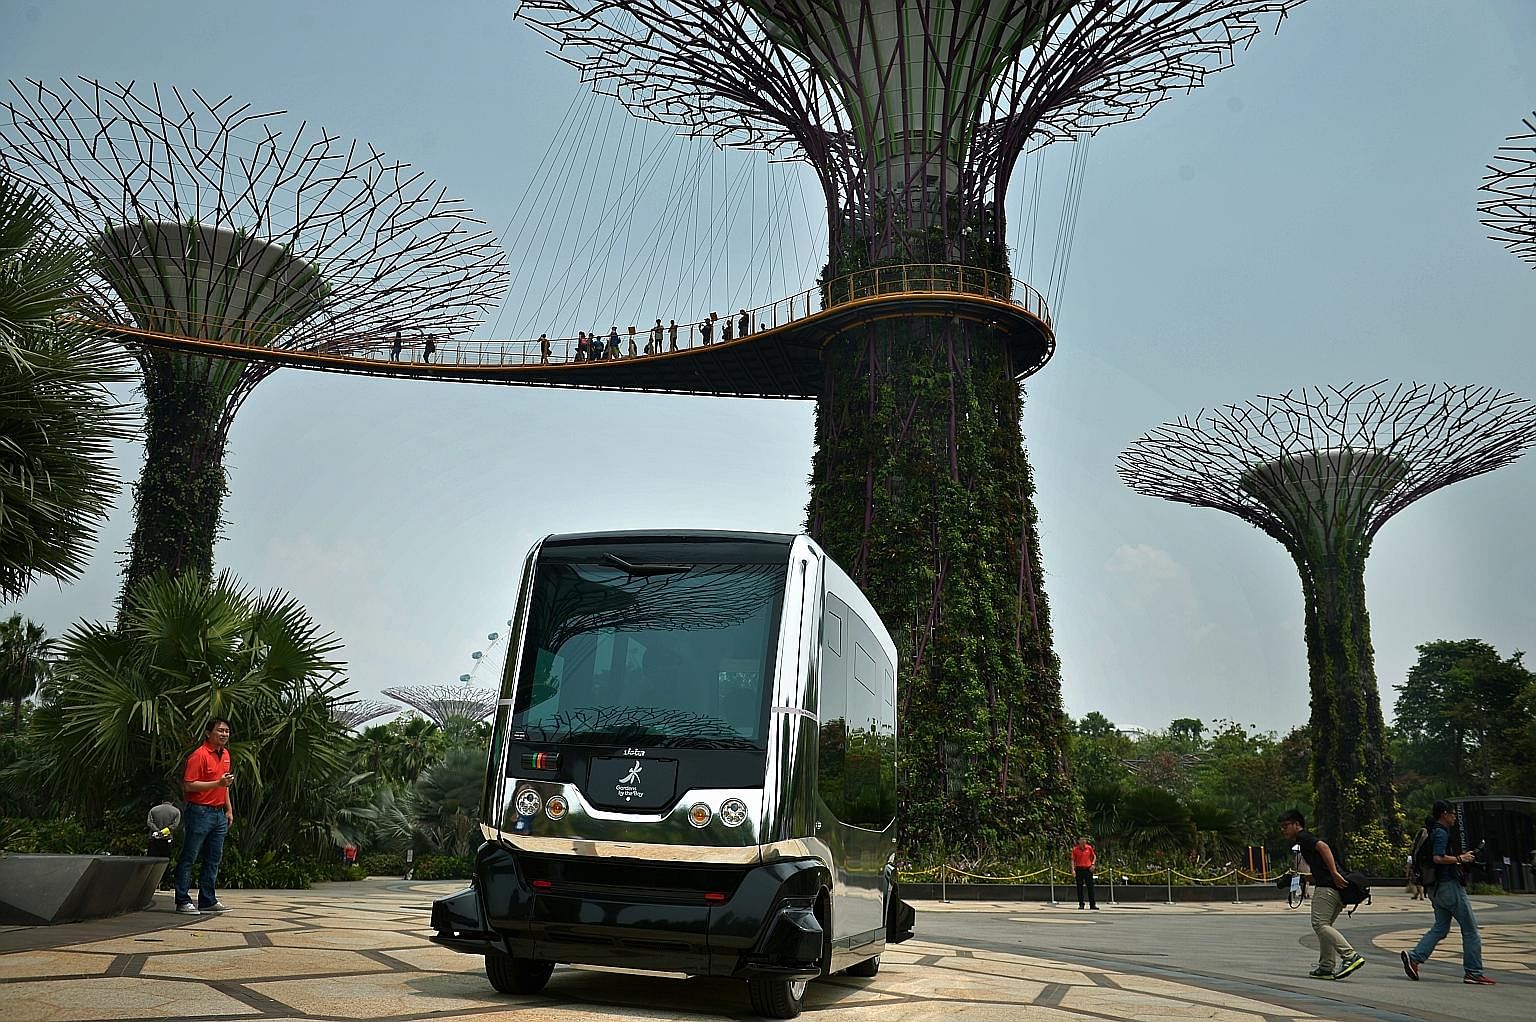 The Auto Rider autonomous vehicle (AV) has been on trial at Gardens by the Bay since October 2015. The AV revolution is being hailed as the next wave in public transportation here, with driverless taxis and buses expected to start making an impact wi